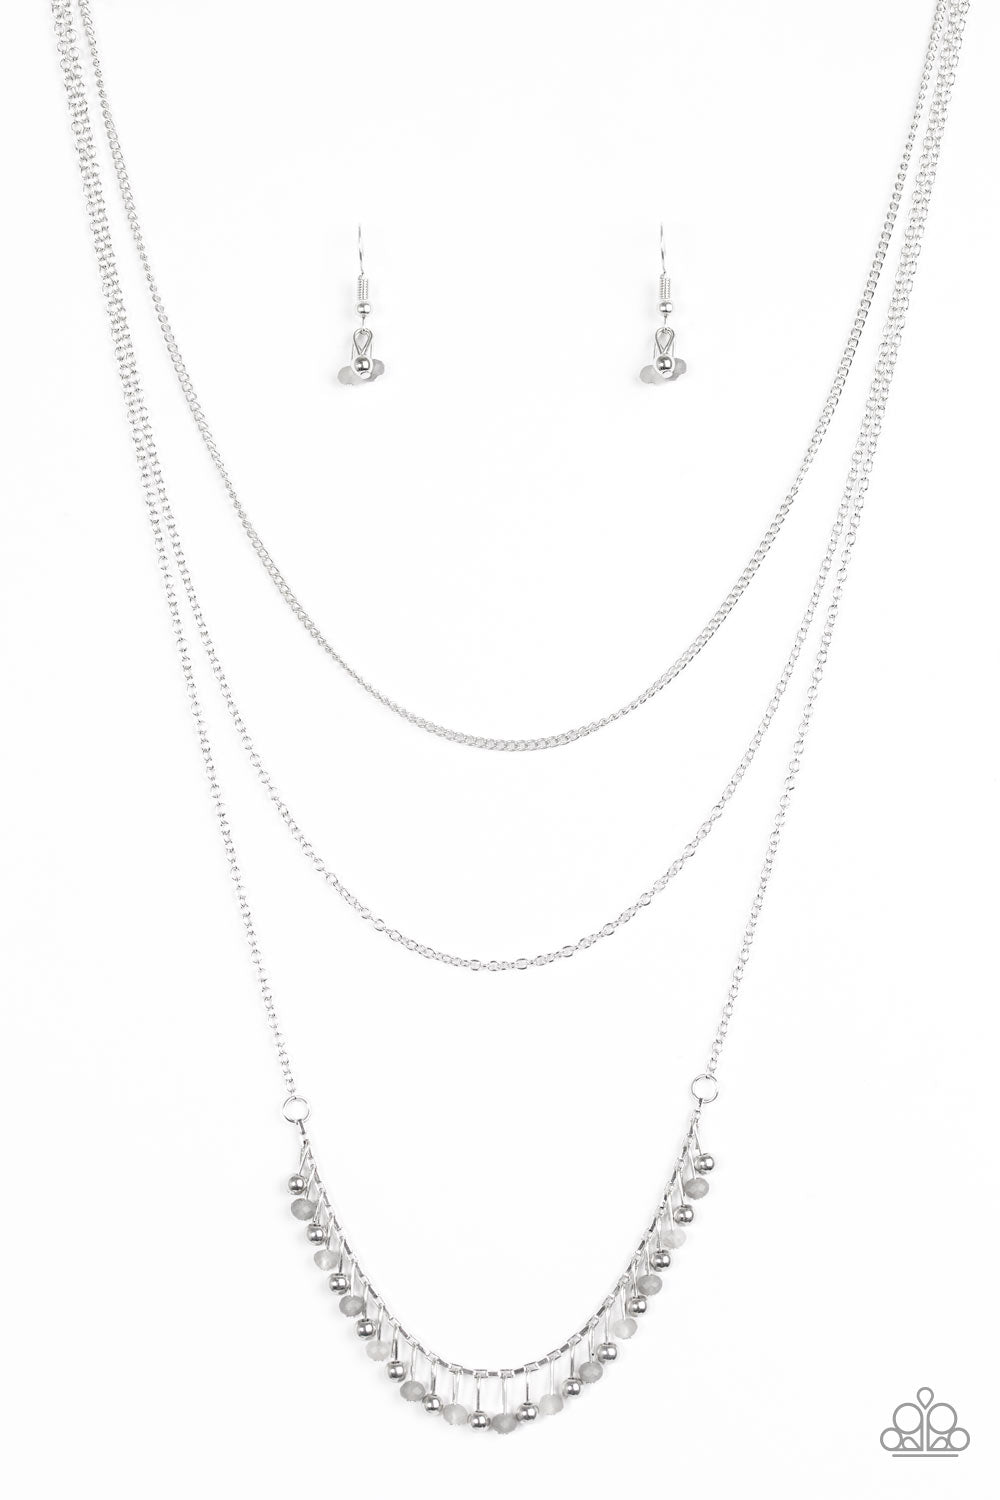 Twinkly Troves Silver Necklace